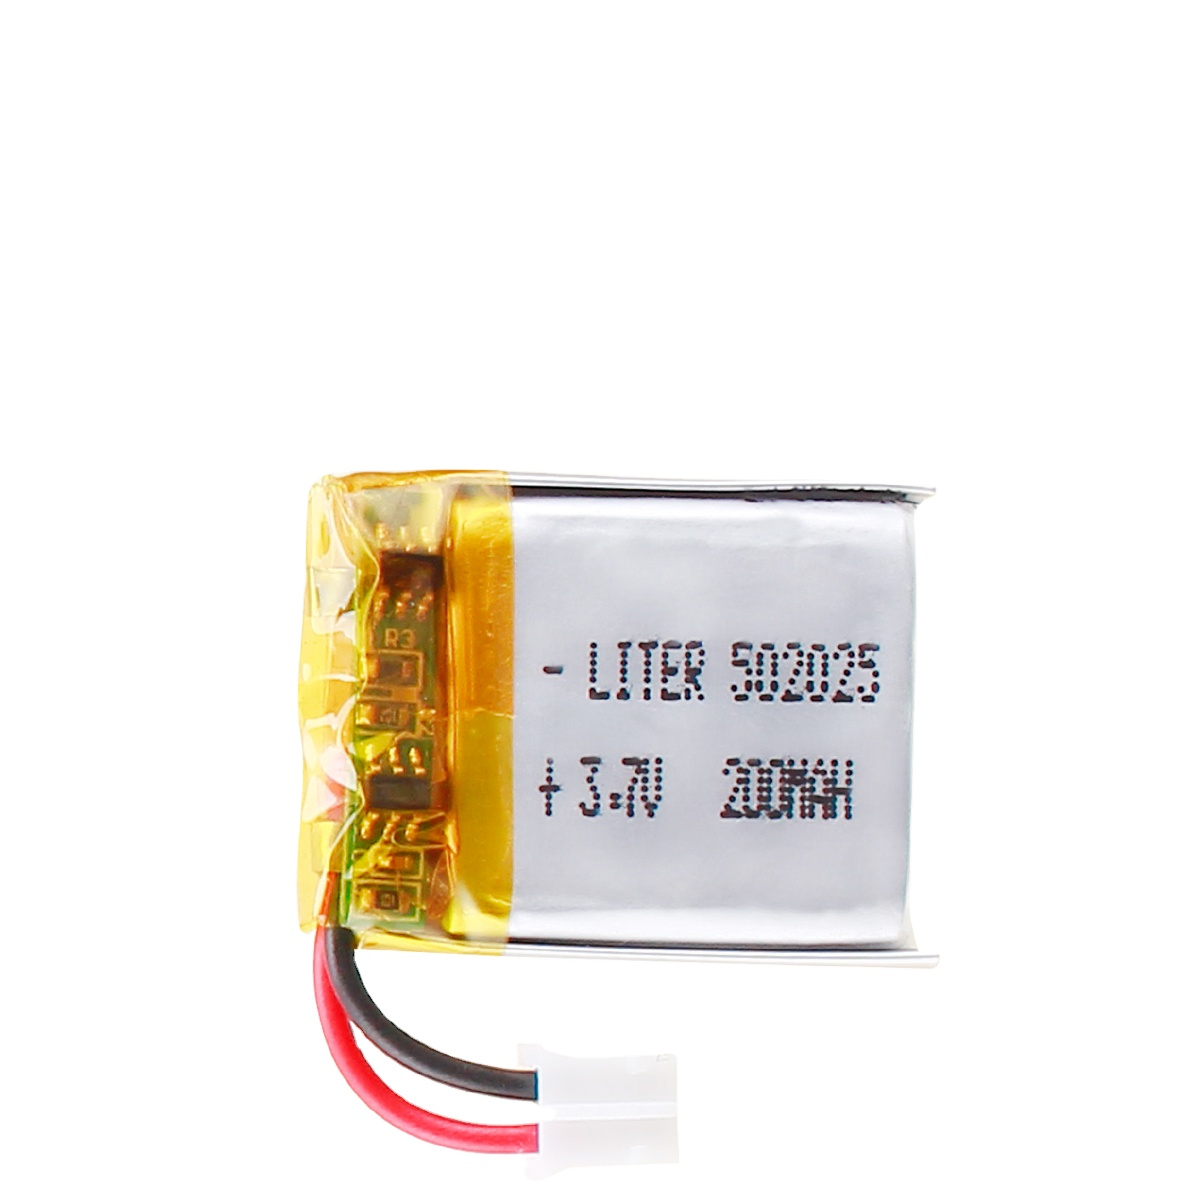 Lithium Polymer Battery liter 522025 3.7V 200mAh With PCM and Wires